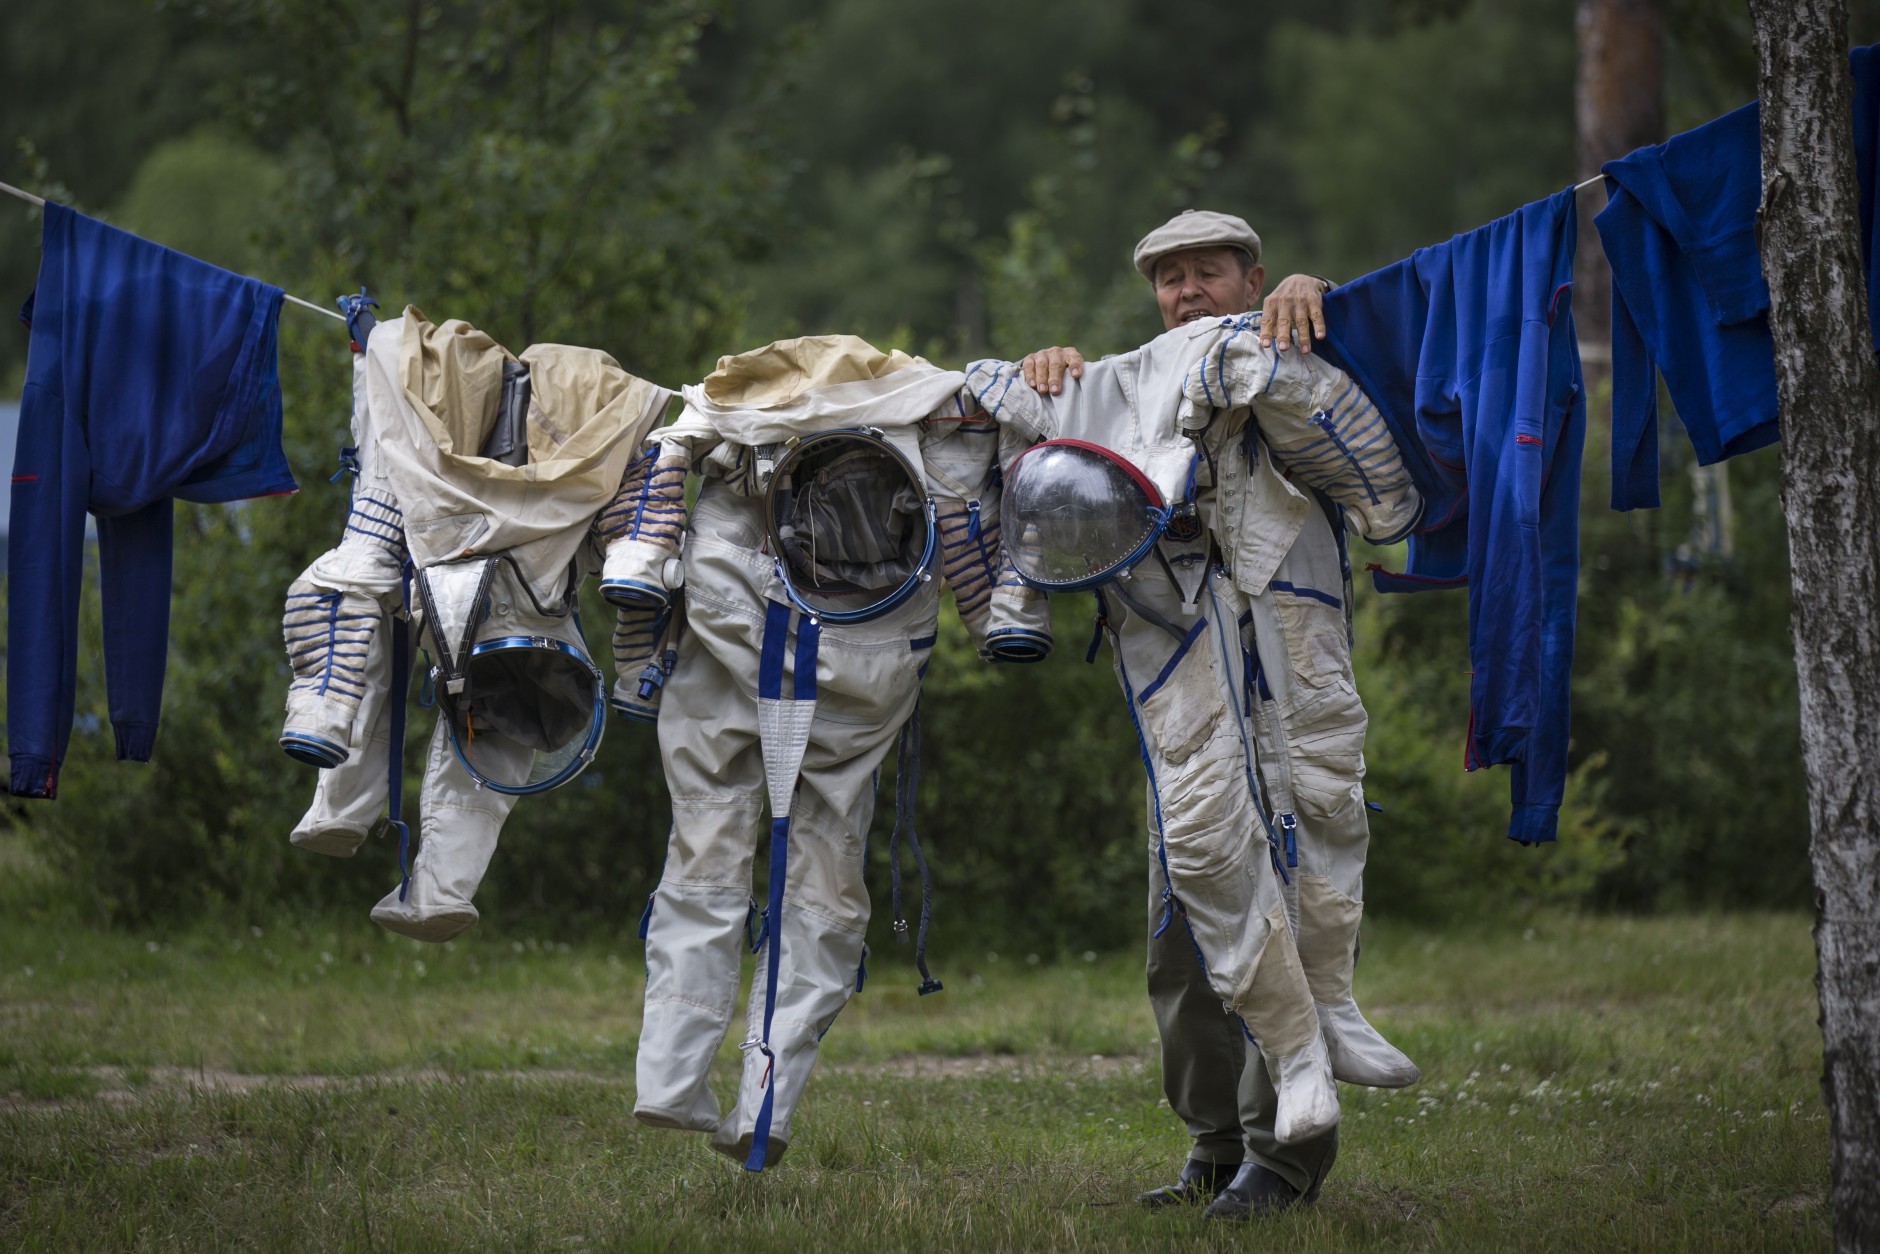 FOR USE AS DESIRED, YEAR END PHOTOS - FILE - An employee of the Russian Space Training Center hangs out space suits to dry of Russian cosmonaut Anatoly Ivanishin, NASA's U.S. flight engineer Kathleen Rubins and Japanese space agency's flight engineer Takuya Onishi after their undergoing training near in Noginsk, 60 km (38 miles) east of Moscow, Russia, Wednesday, July 2, 2014. The training was intended to simulate the capsule landing on water. (AP Photo/Alexander Zemlianichenko, File)